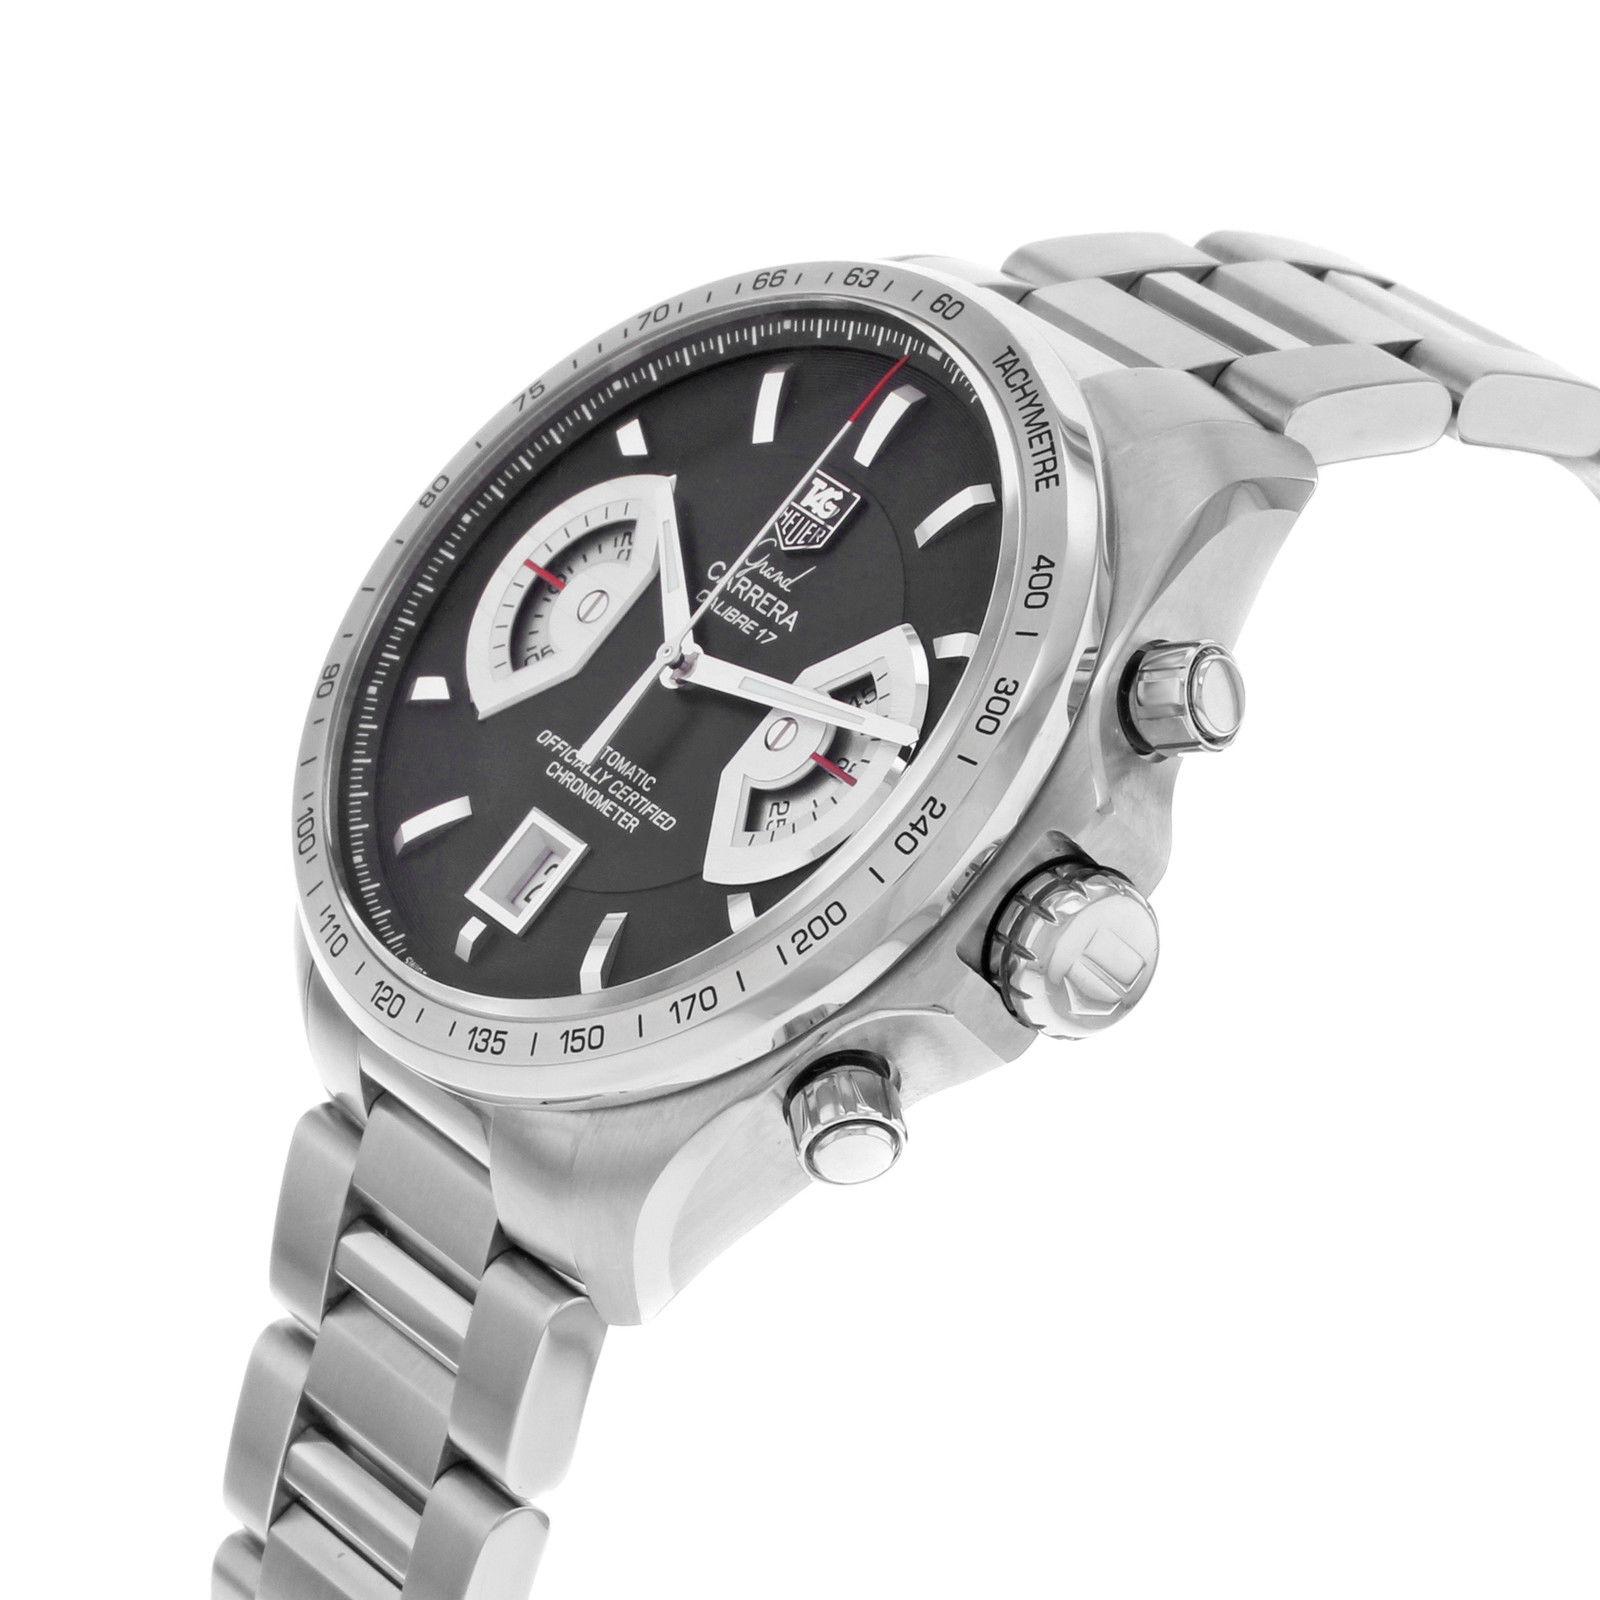 This display model TAG Heuer Grand Carrera CAV511A.BA0902 is a beautiful men's timepiece that is powered by an automatic movement which is cased in a stainless steel case. It has a round shape face, chronograph, date, small seconds subdial dial and